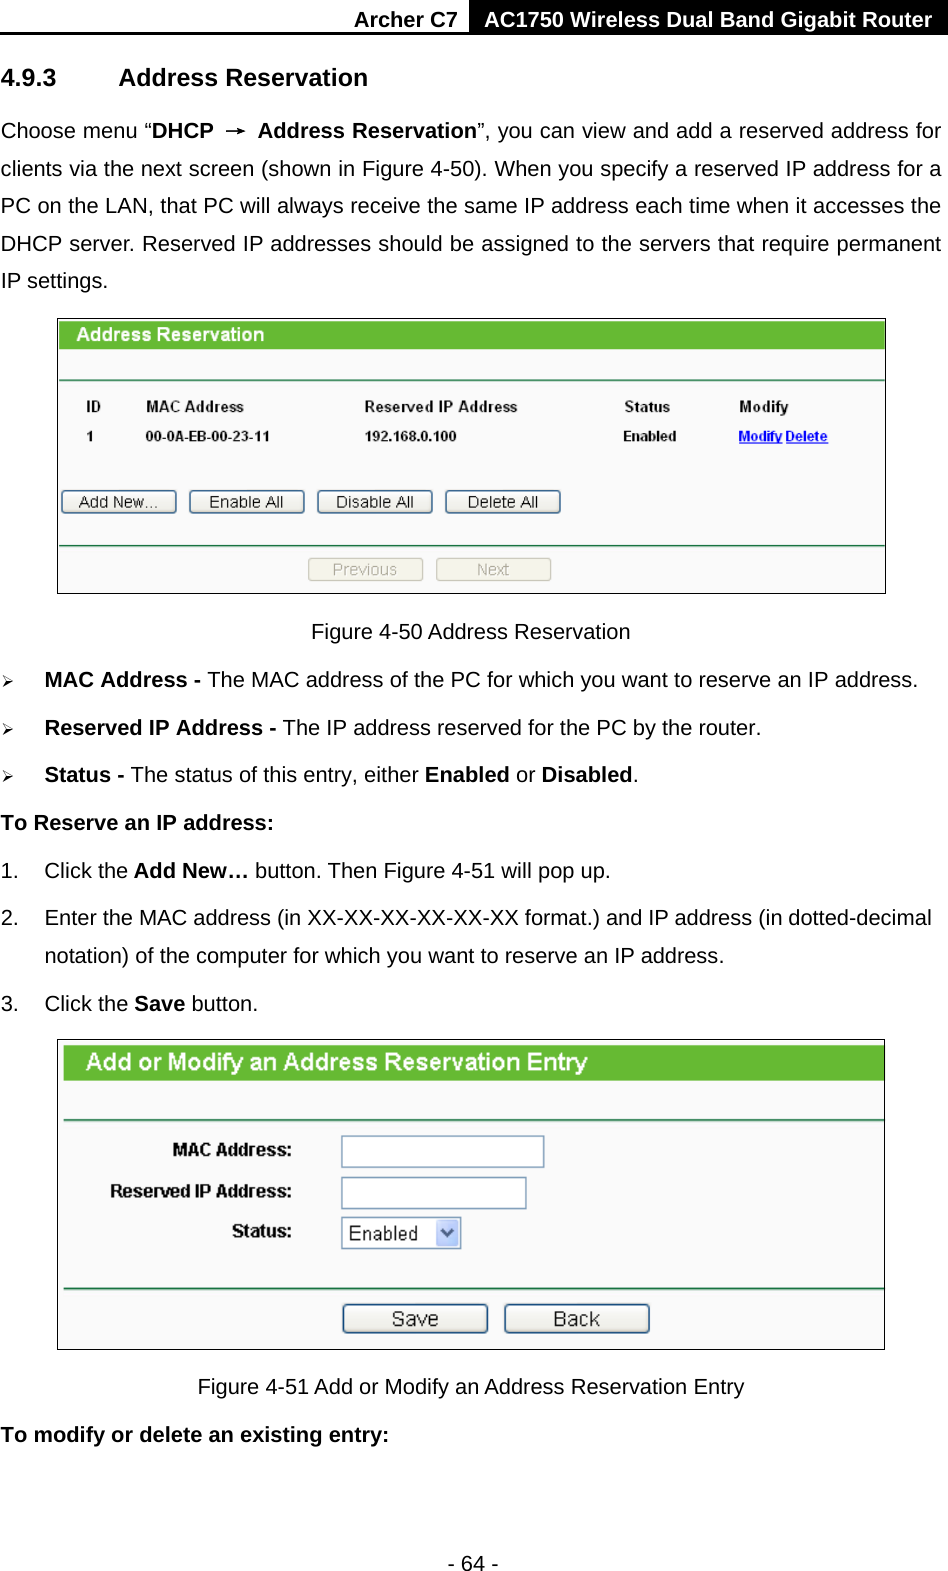 Archer C7 AC1750 Wireless Dual Band Gigabit Router  - 64 - 4.9.3 Address Reservation Choose menu “DHCP → Address Reservation”, you can view and add a reserved address for clients via the next screen (shown in Figure 4-50). When you specify a reserved IP address for a PC on the LAN, that PC will always receive the same IP address each time when it accesses the DHCP server. Reserved IP addresses should be assigned to the servers that require permanent IP settings.    Figure 4-50 Address Reservation  MAC Address - The MAC address of the PC for which you want to reserve an IP address.  Reserved IP Address - The IP address reserved for the PC by the router.  Status - The status of this entry, either Enabled or Disabled. To Reserve an IP address:   1. Click the Add New… button. Then Figure 4-51 will pop up. 2. Enter the MAC address (in XX-XX-XX-XX-XX-XX format.) and IP address (in dotted-decimal notation) of the computer for which you want to reserve an IP address.   3. Click the Save button.    Figure 4-51 Add or Modify an Address Reservation Entry To modify or delete an existing entry: 